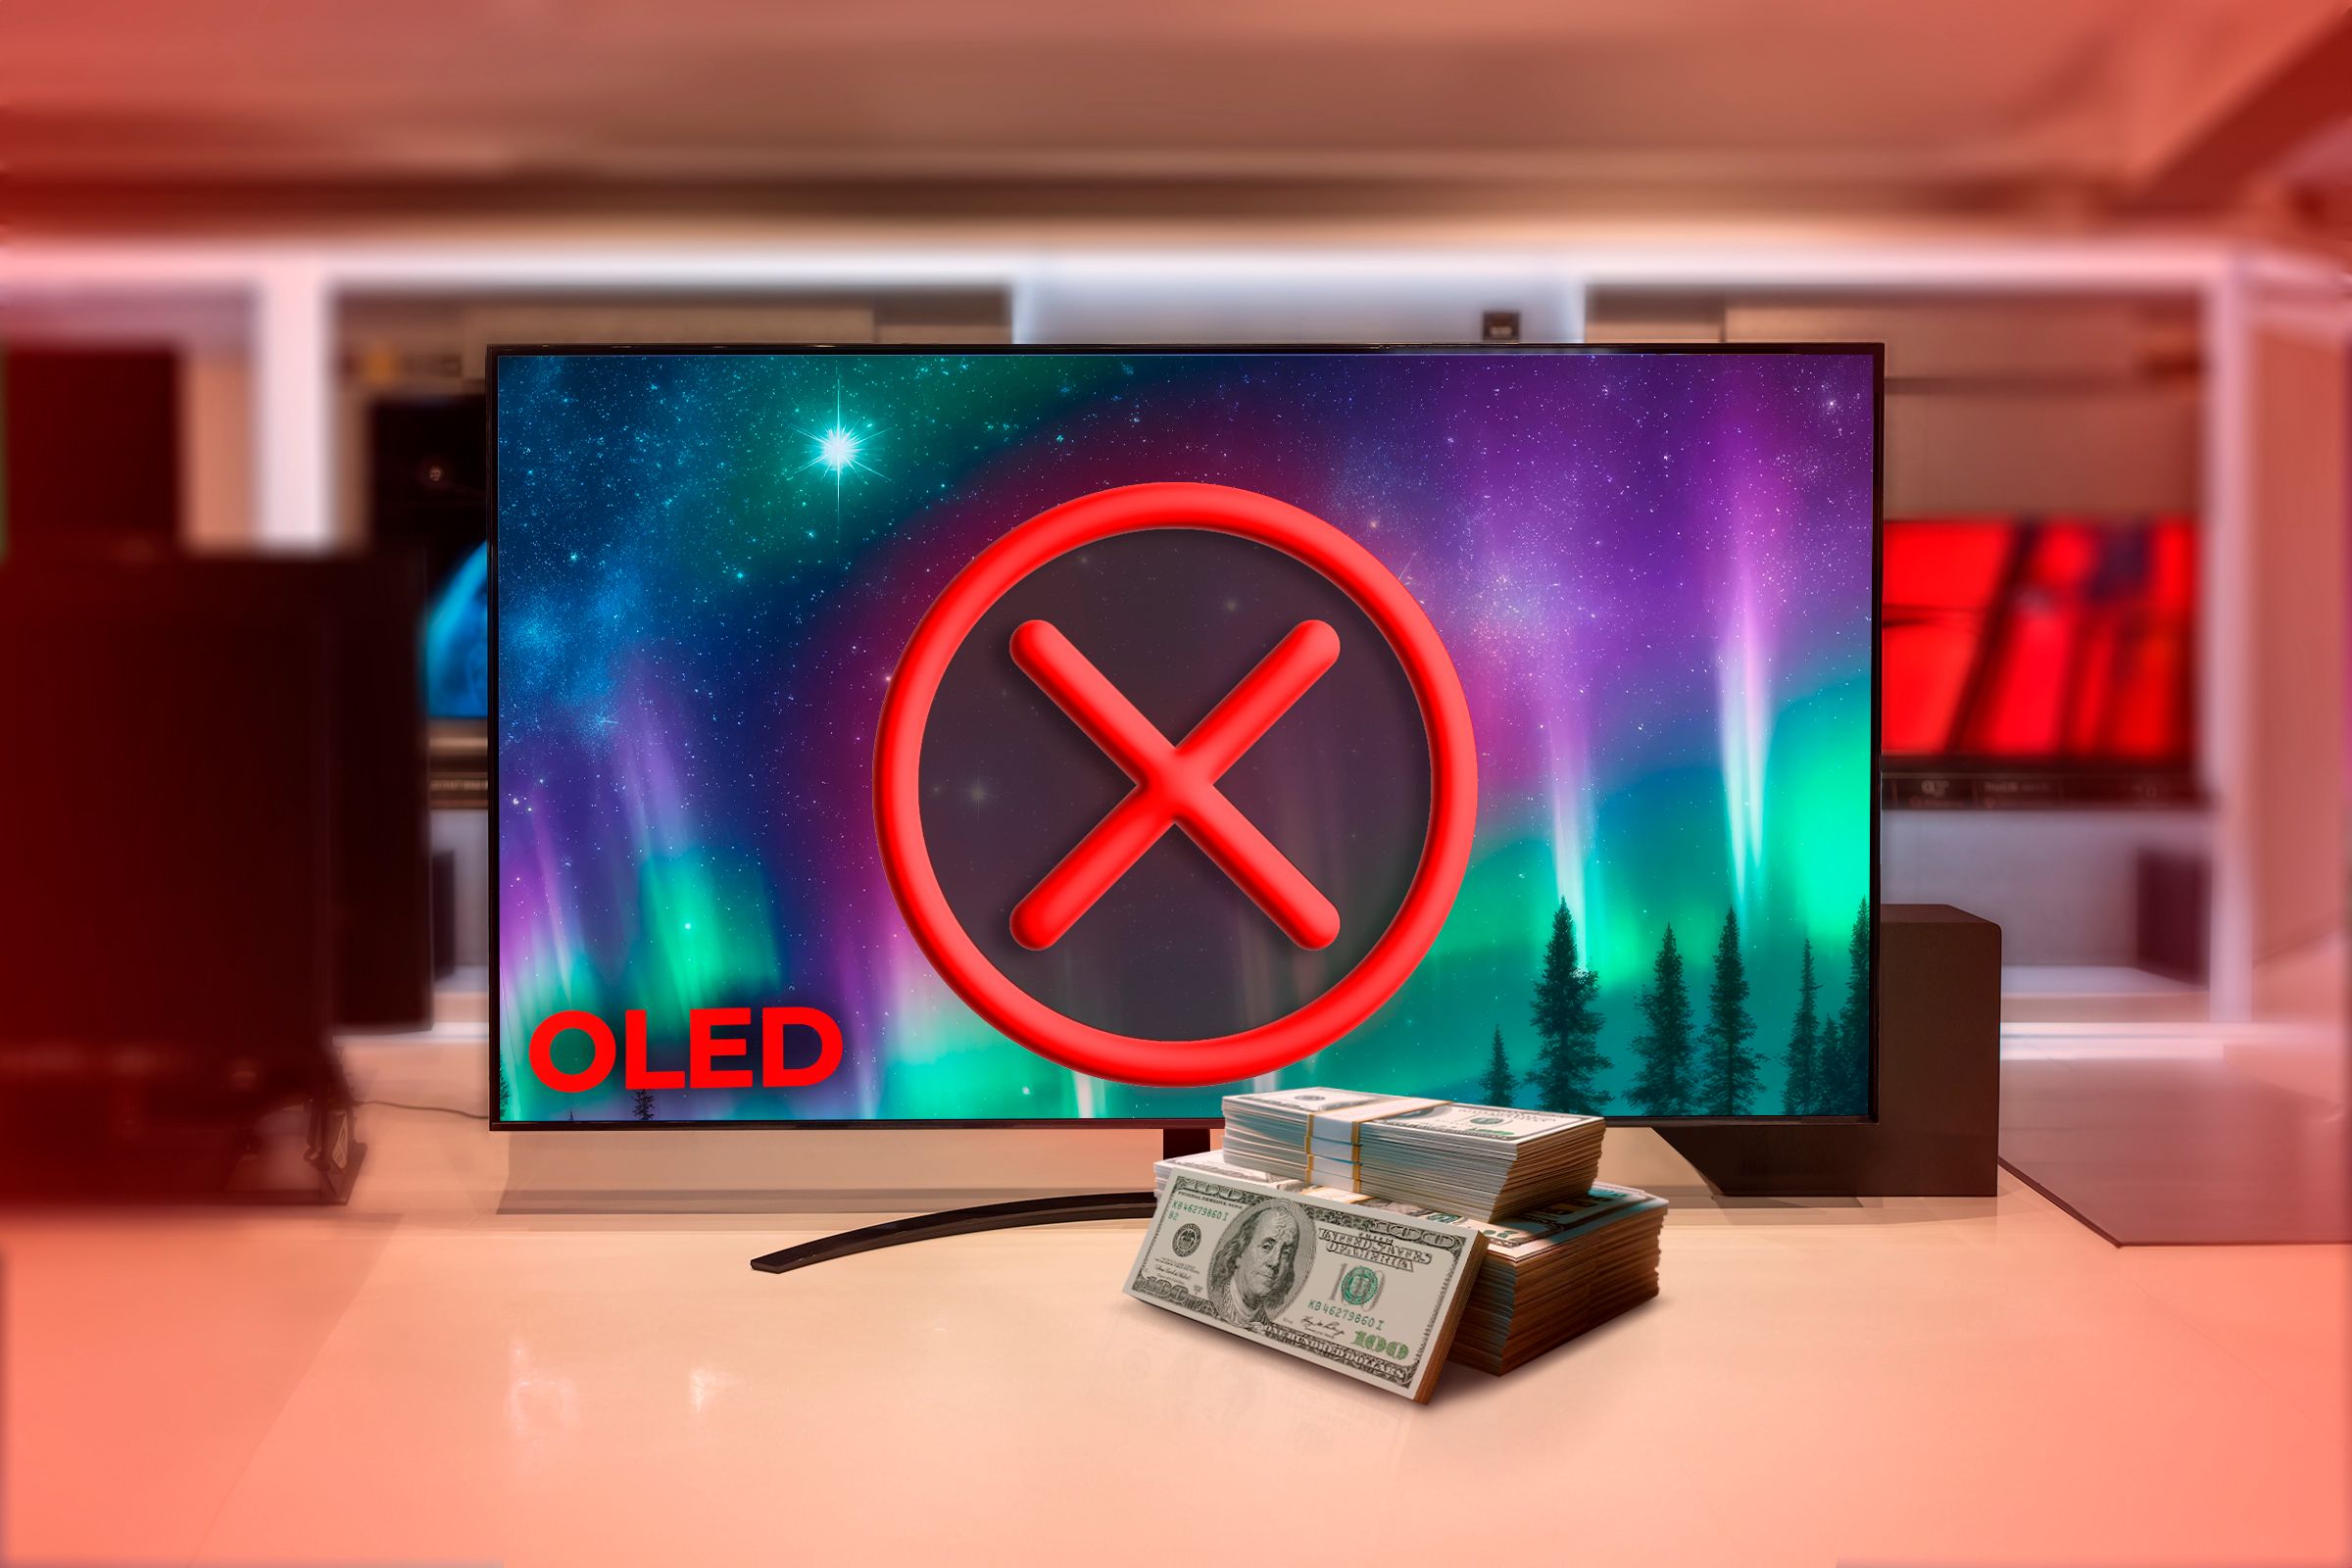 An OLED monitor in a store with a bundle of money and a 'no' symbol in the center.